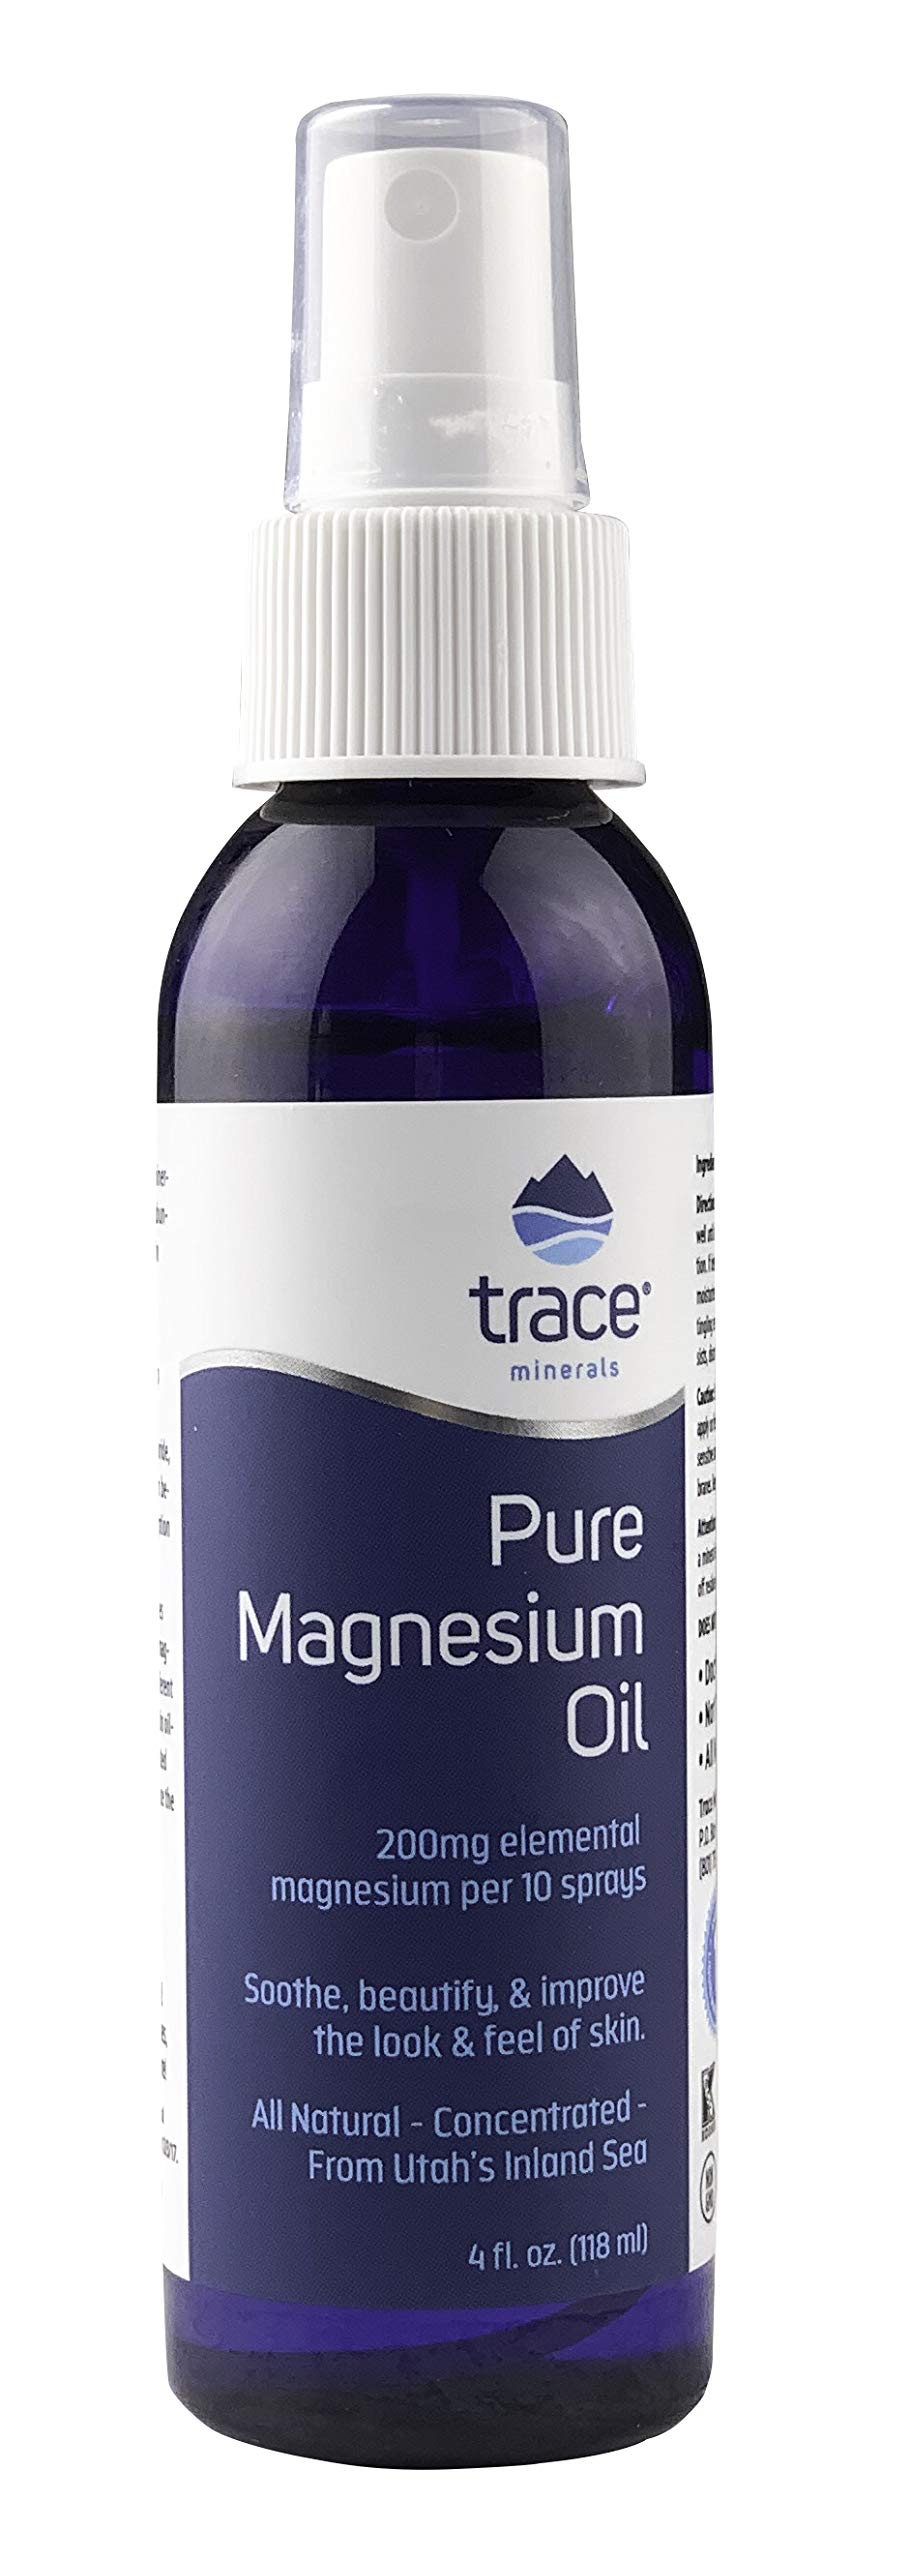 Trace Minerals | Pure Magnesium Oil | Skincare, Soothe, Beautify, & Smoothe The Look, and Feel of Skin | All Natural Concentrated | 4 fl. oz. (118 ml)